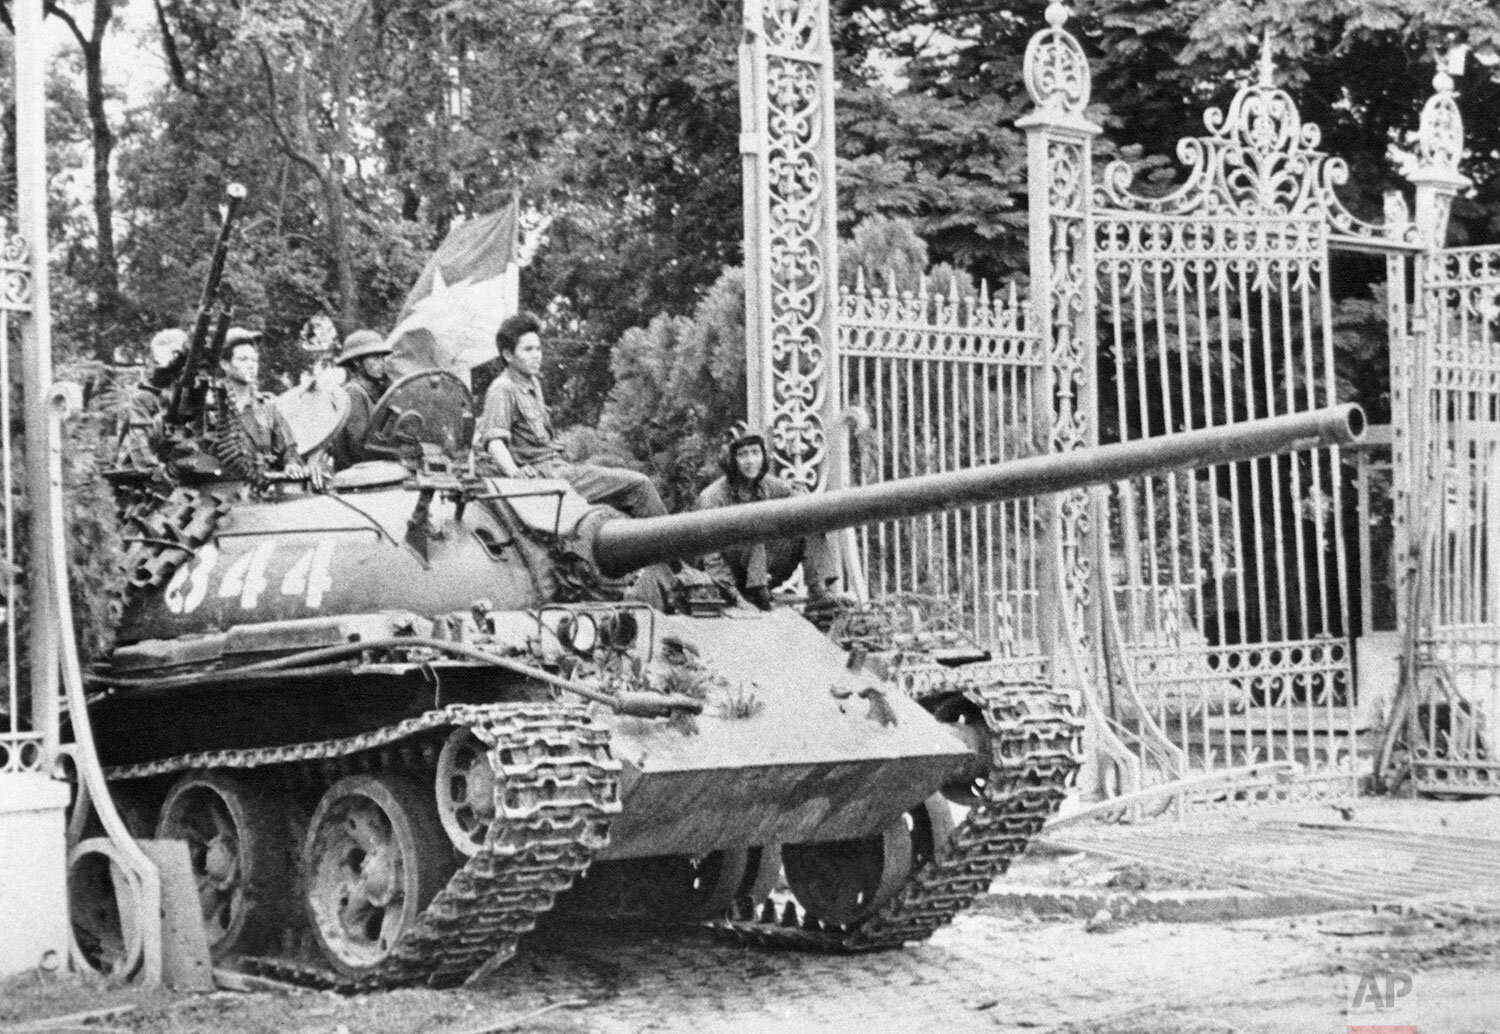  A Provisional Revolutionary Government (PRG) tank enters the gates of the Presidential Palace in Saigon on May 1, 1975. (AP Photo/Frances Starner) 